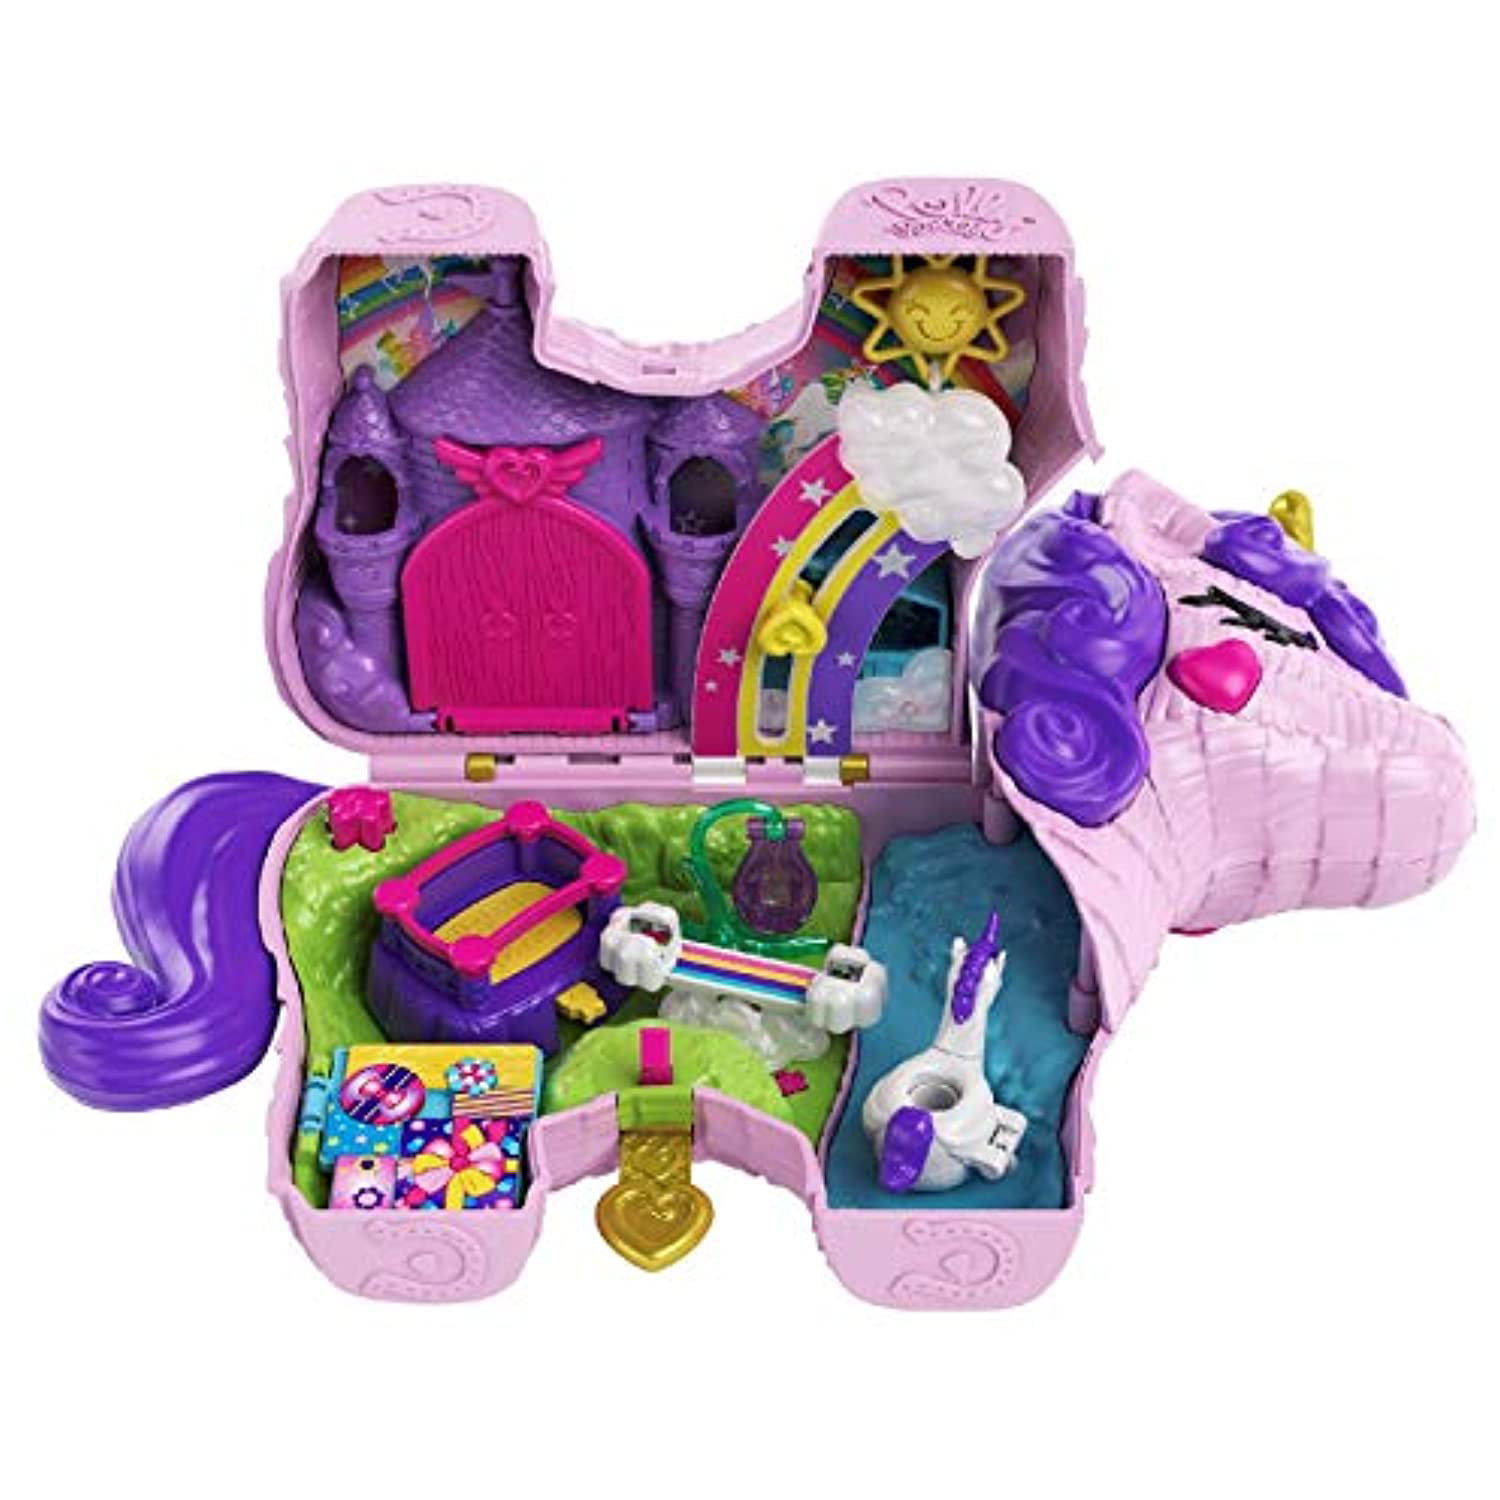 Polly Pocket GKL57 POLLYVILLE Candy Store 